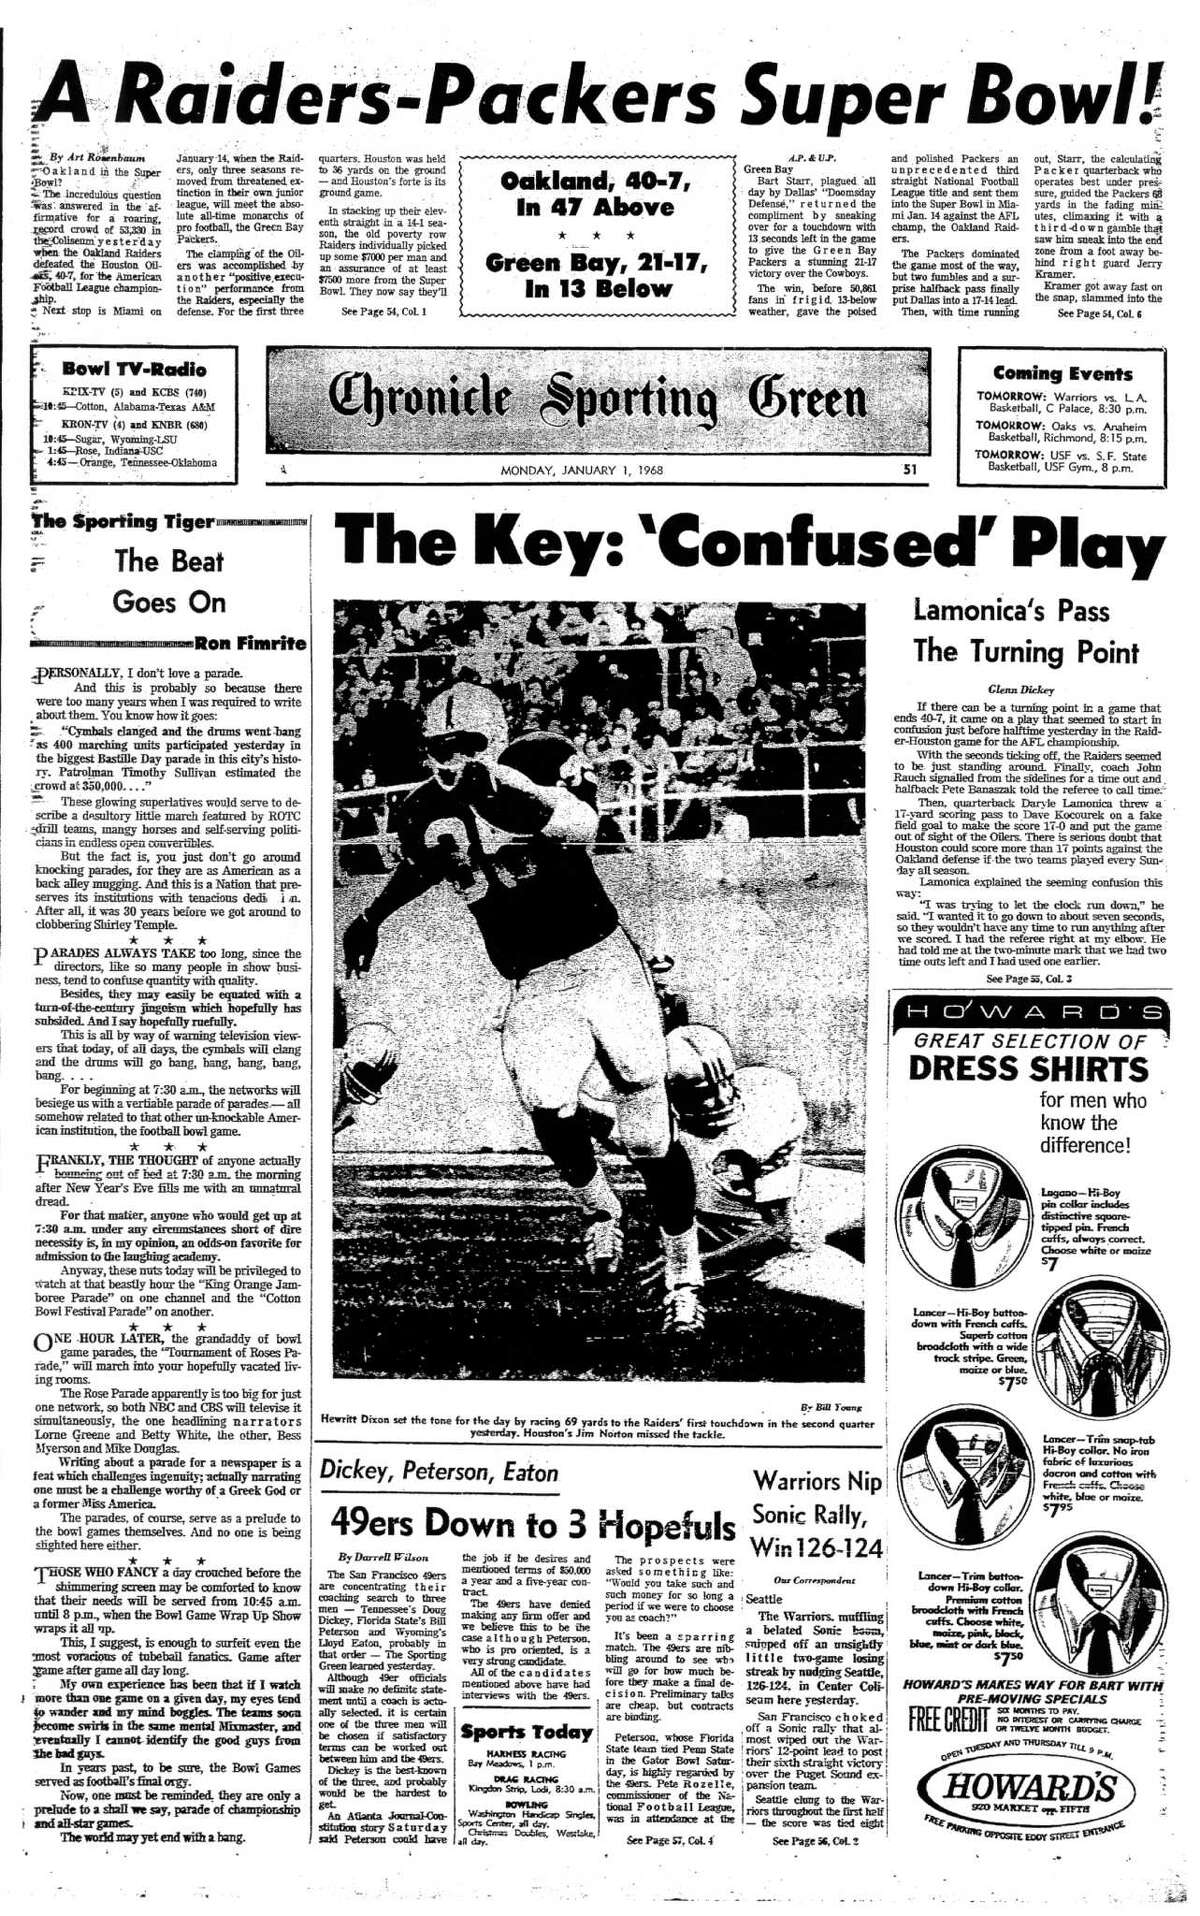 The front page from when the Oakland Raiders won the Championship game to reach Super Bowl II, eventually losing to the Green Bay Packers.